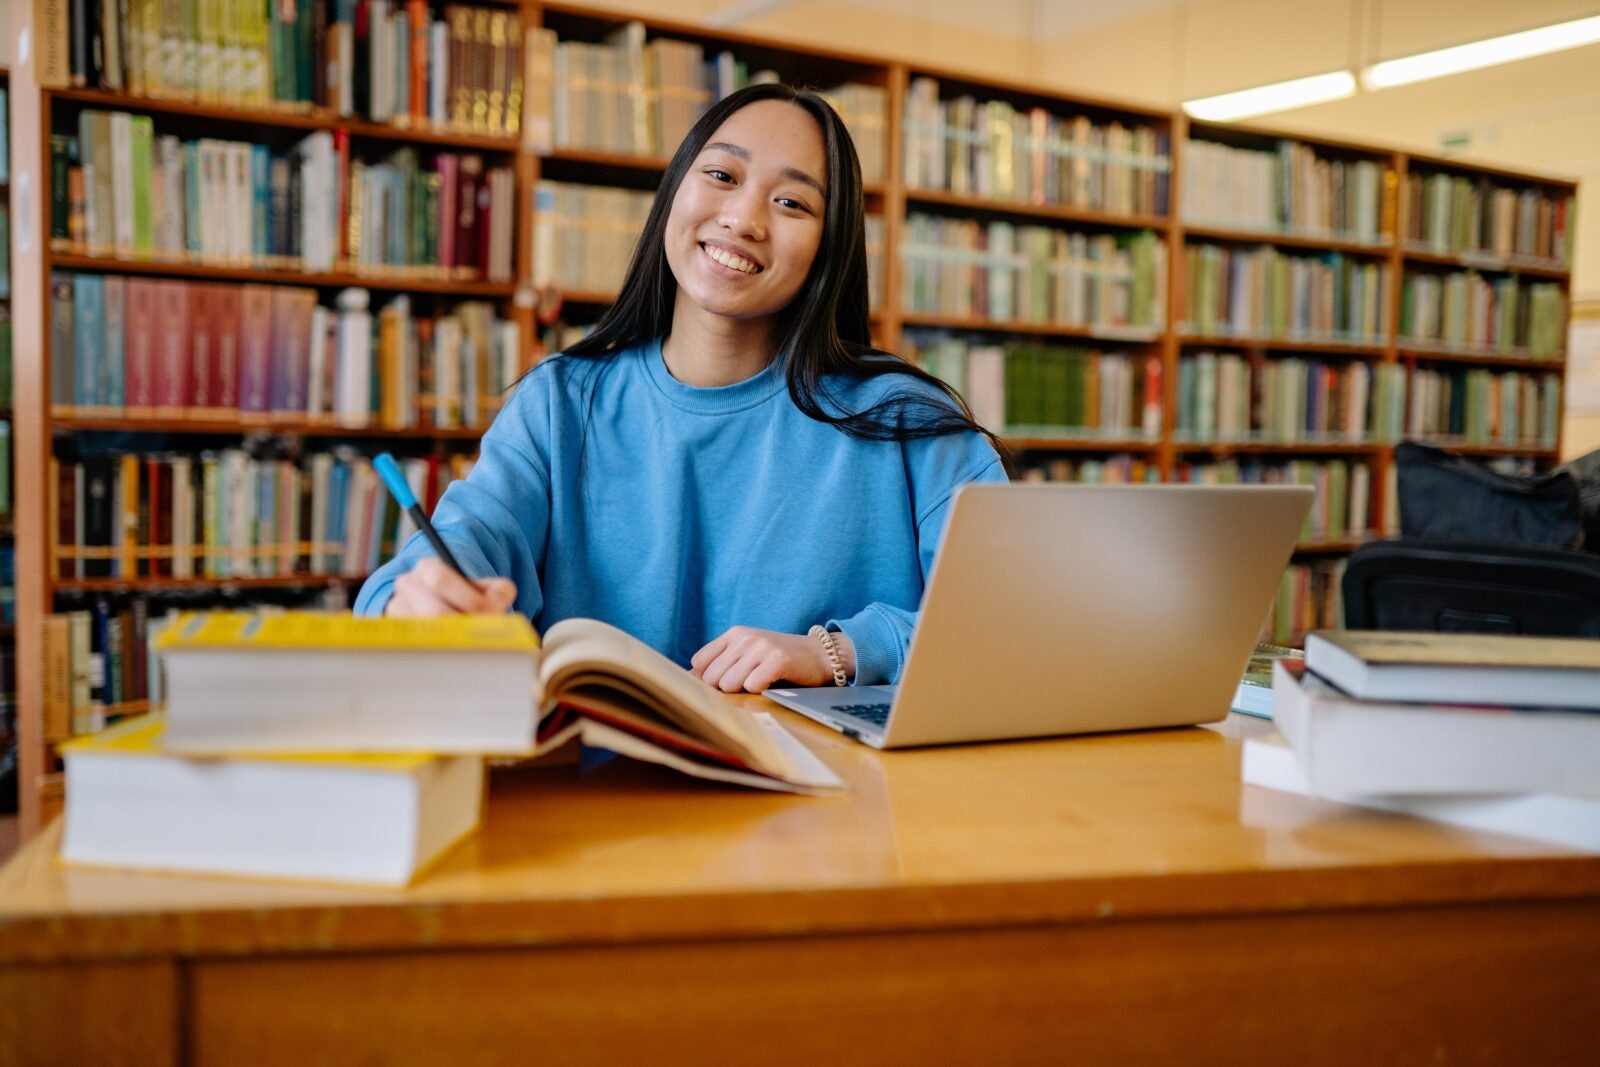 Young woman in blue sweater doing work in a library and posing while smiling